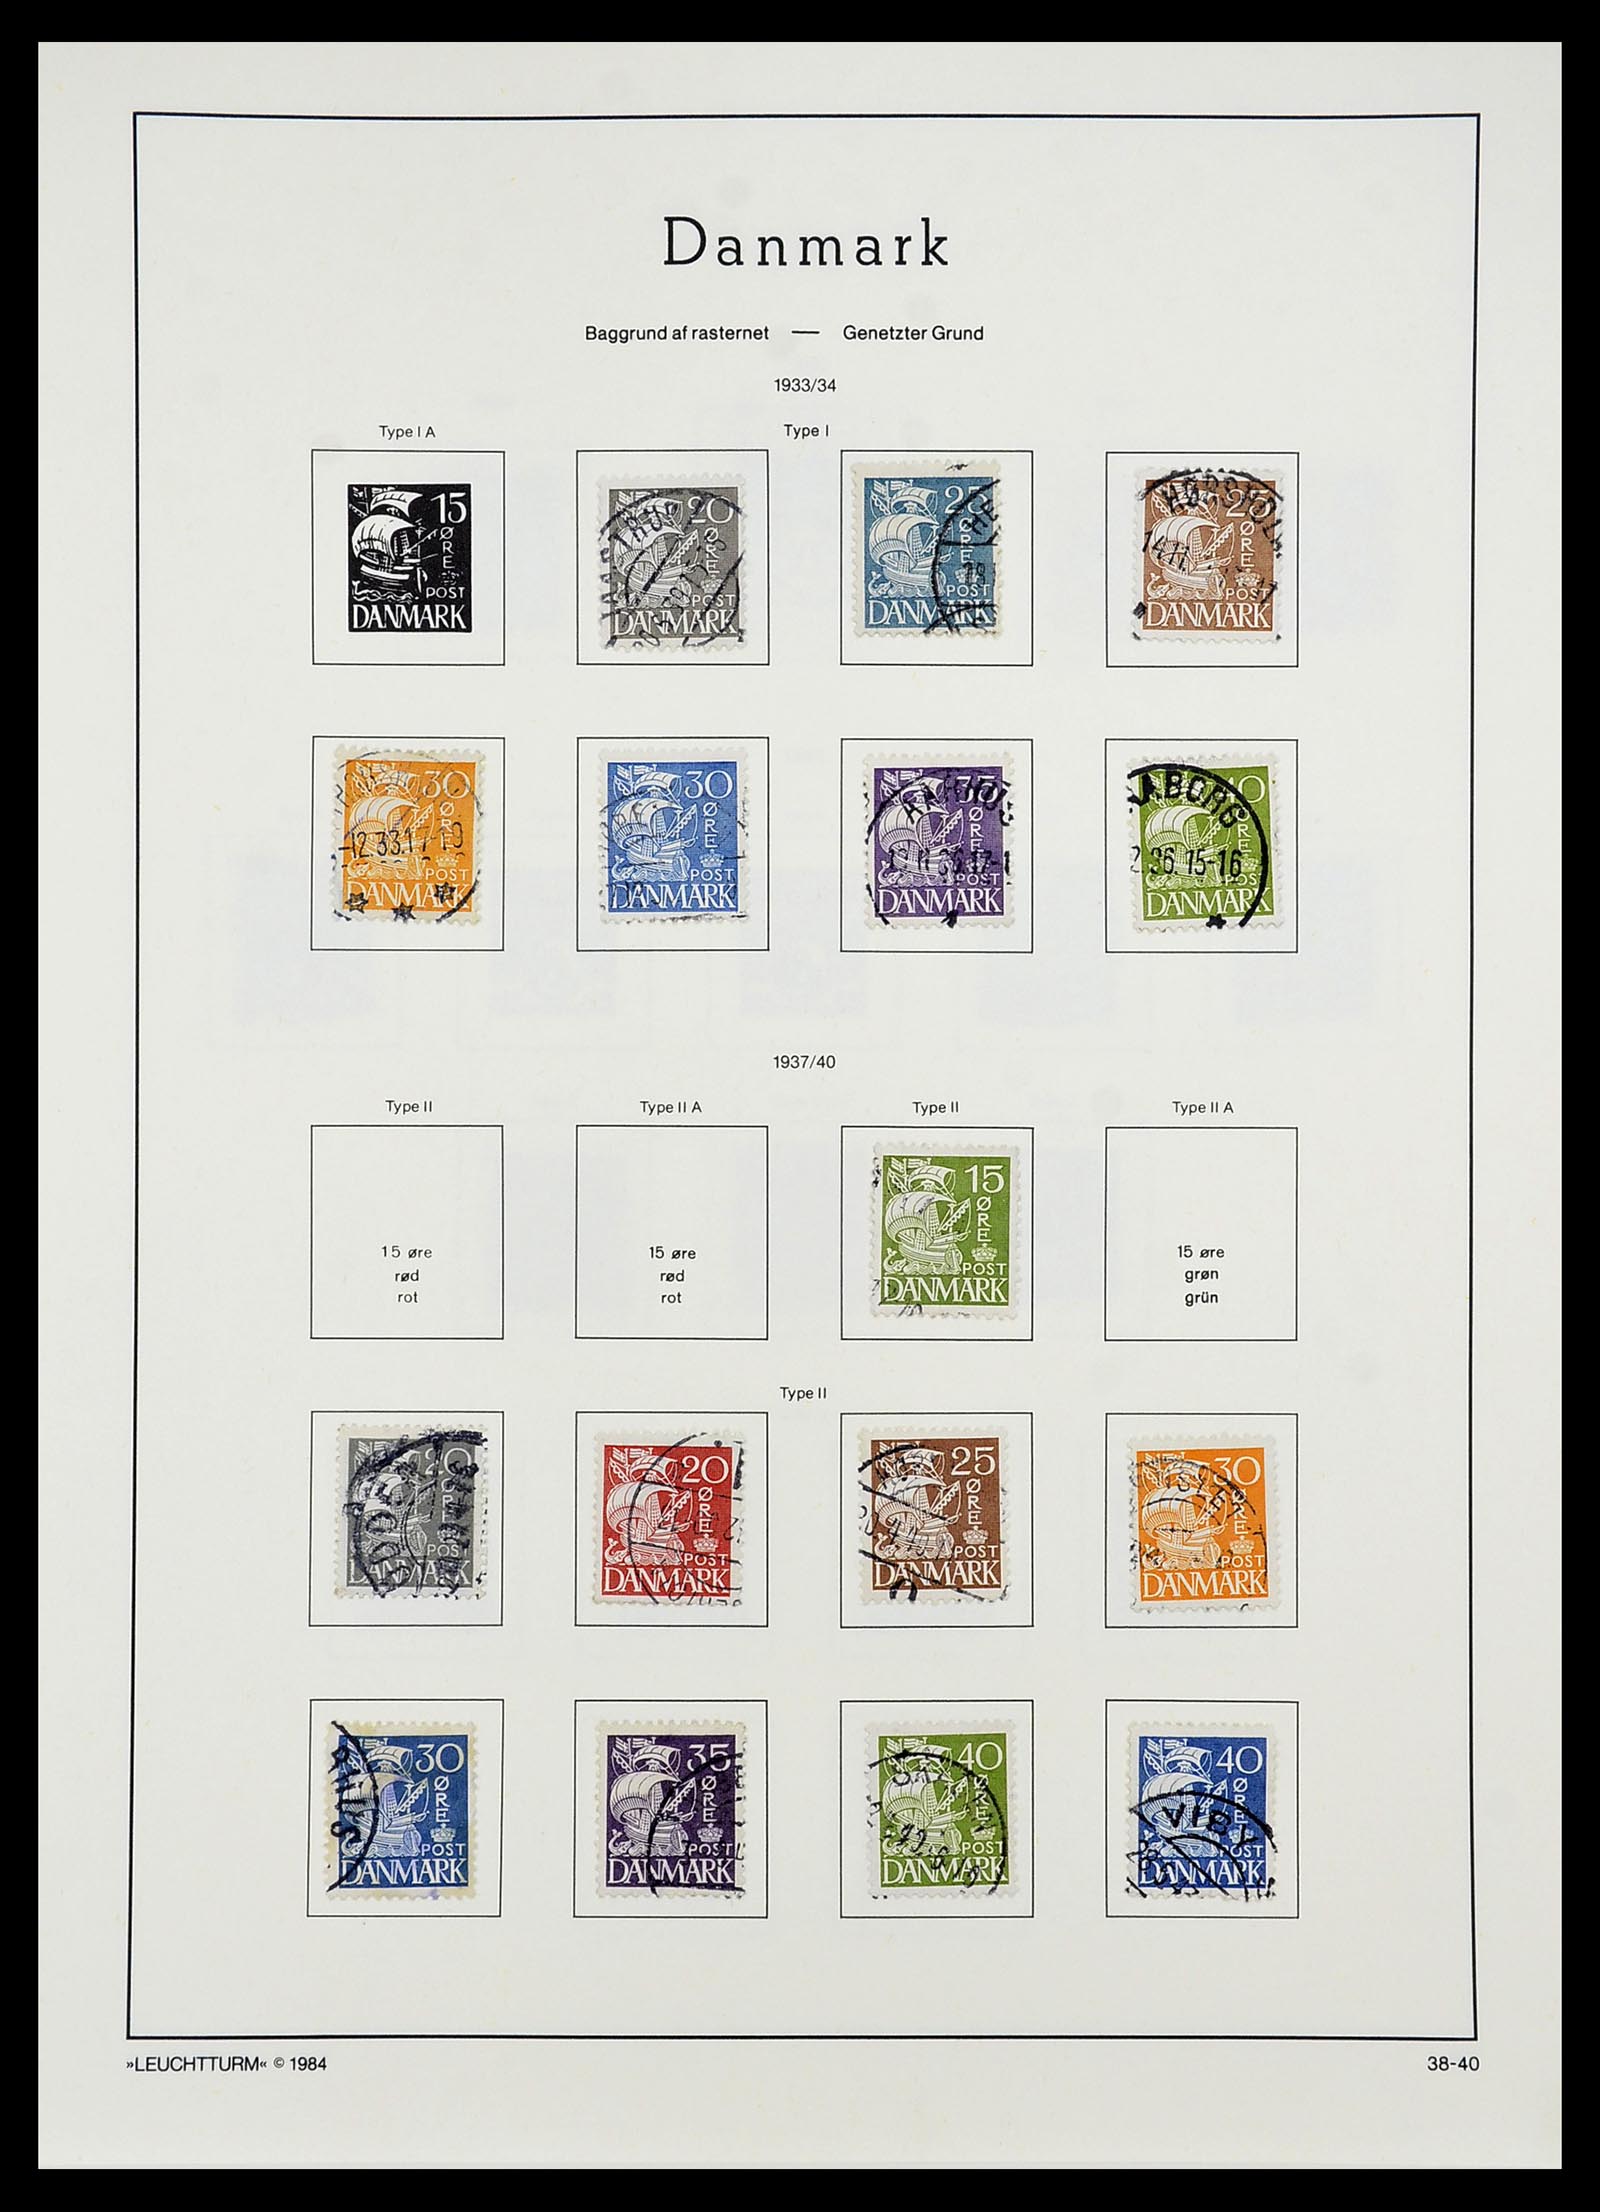 34167 024 - Stamp collection 34167 Denmark 1851-2004.